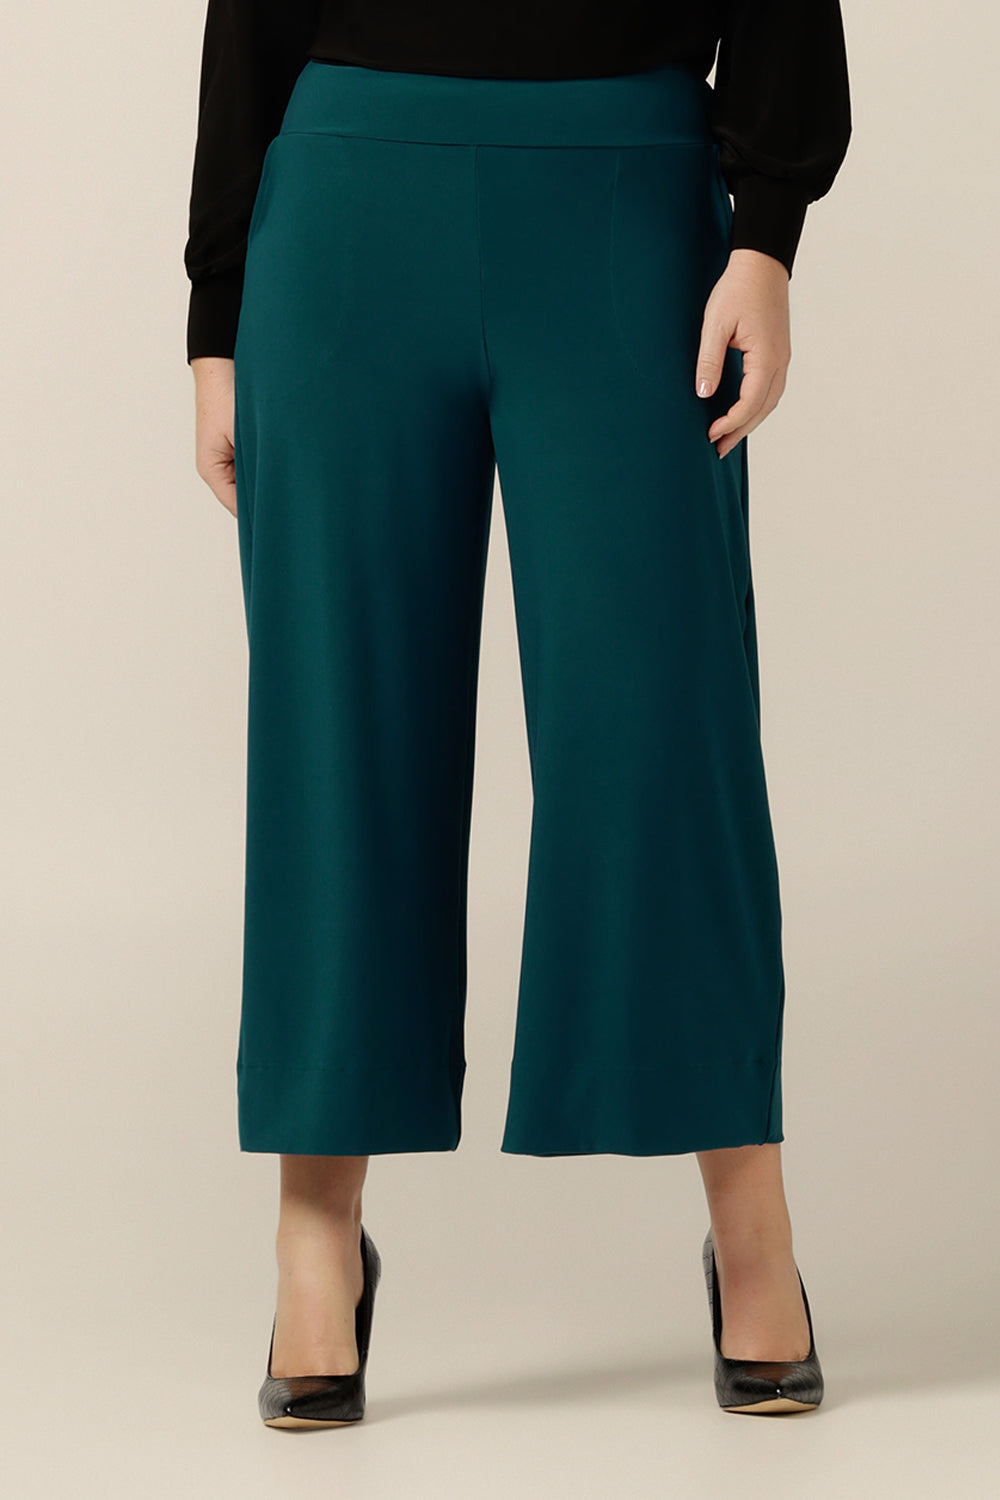 A close up of an Australian-made wide leg, cropped length jersey trouser in petrol green. By Australian and New Zealand fashion brand, L&F these work culotte pants promise to be a comfortable corporate trouser for sizes 8 to size 24. 